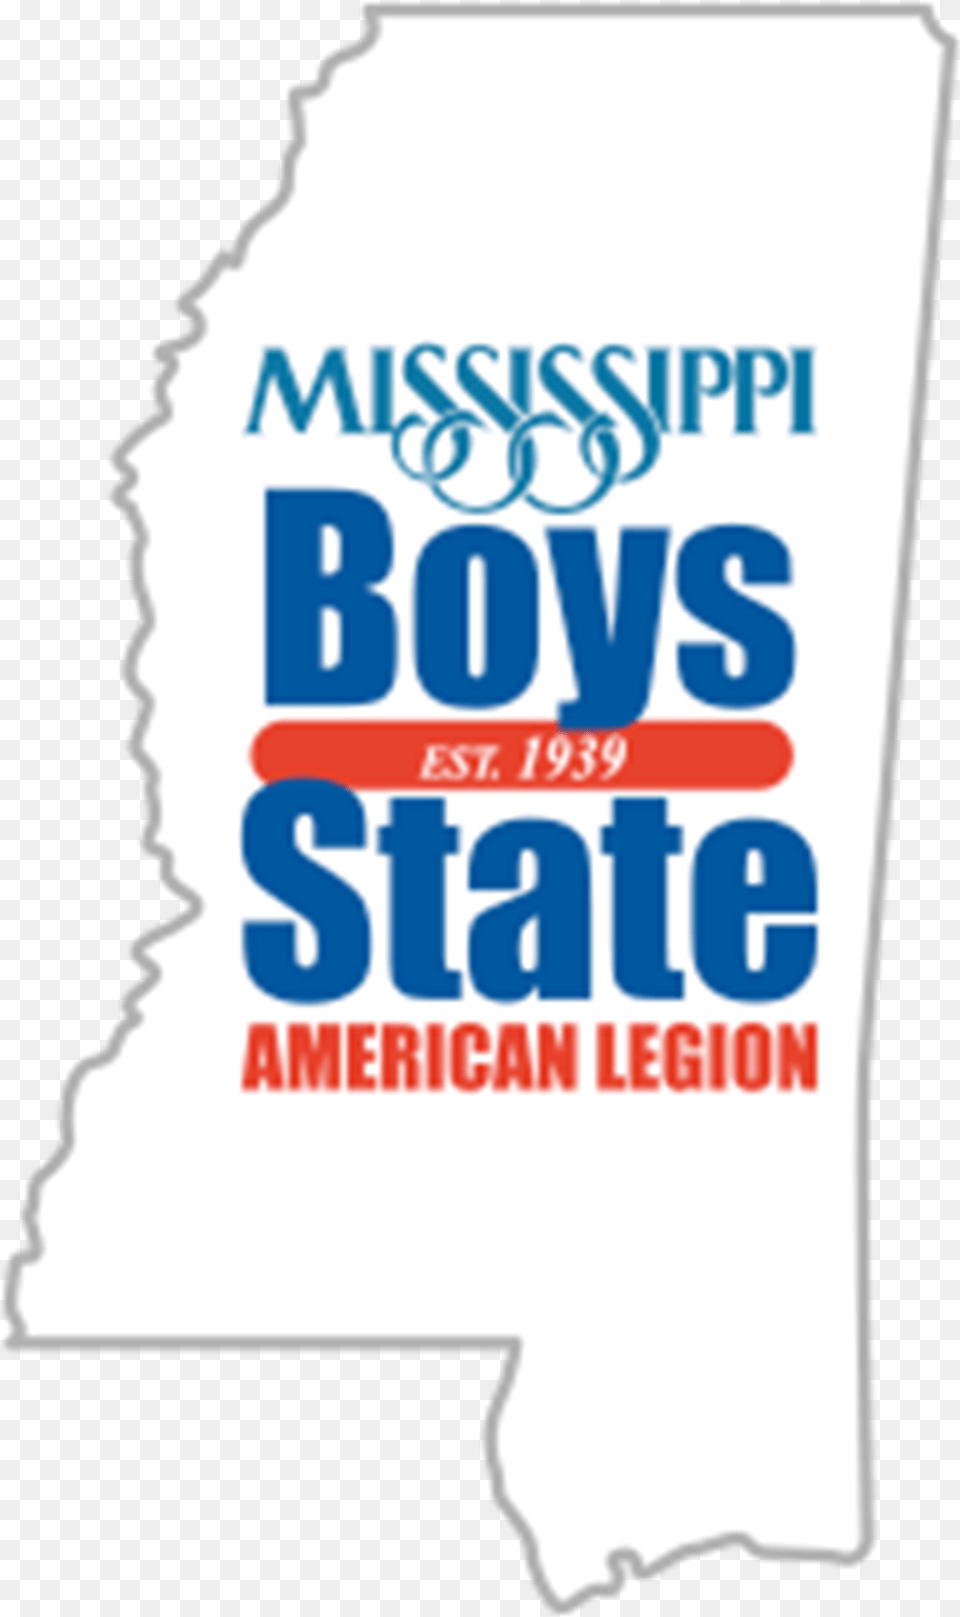 Mississippi Boys State, Adult, Wedding, Person, Woman Png Image